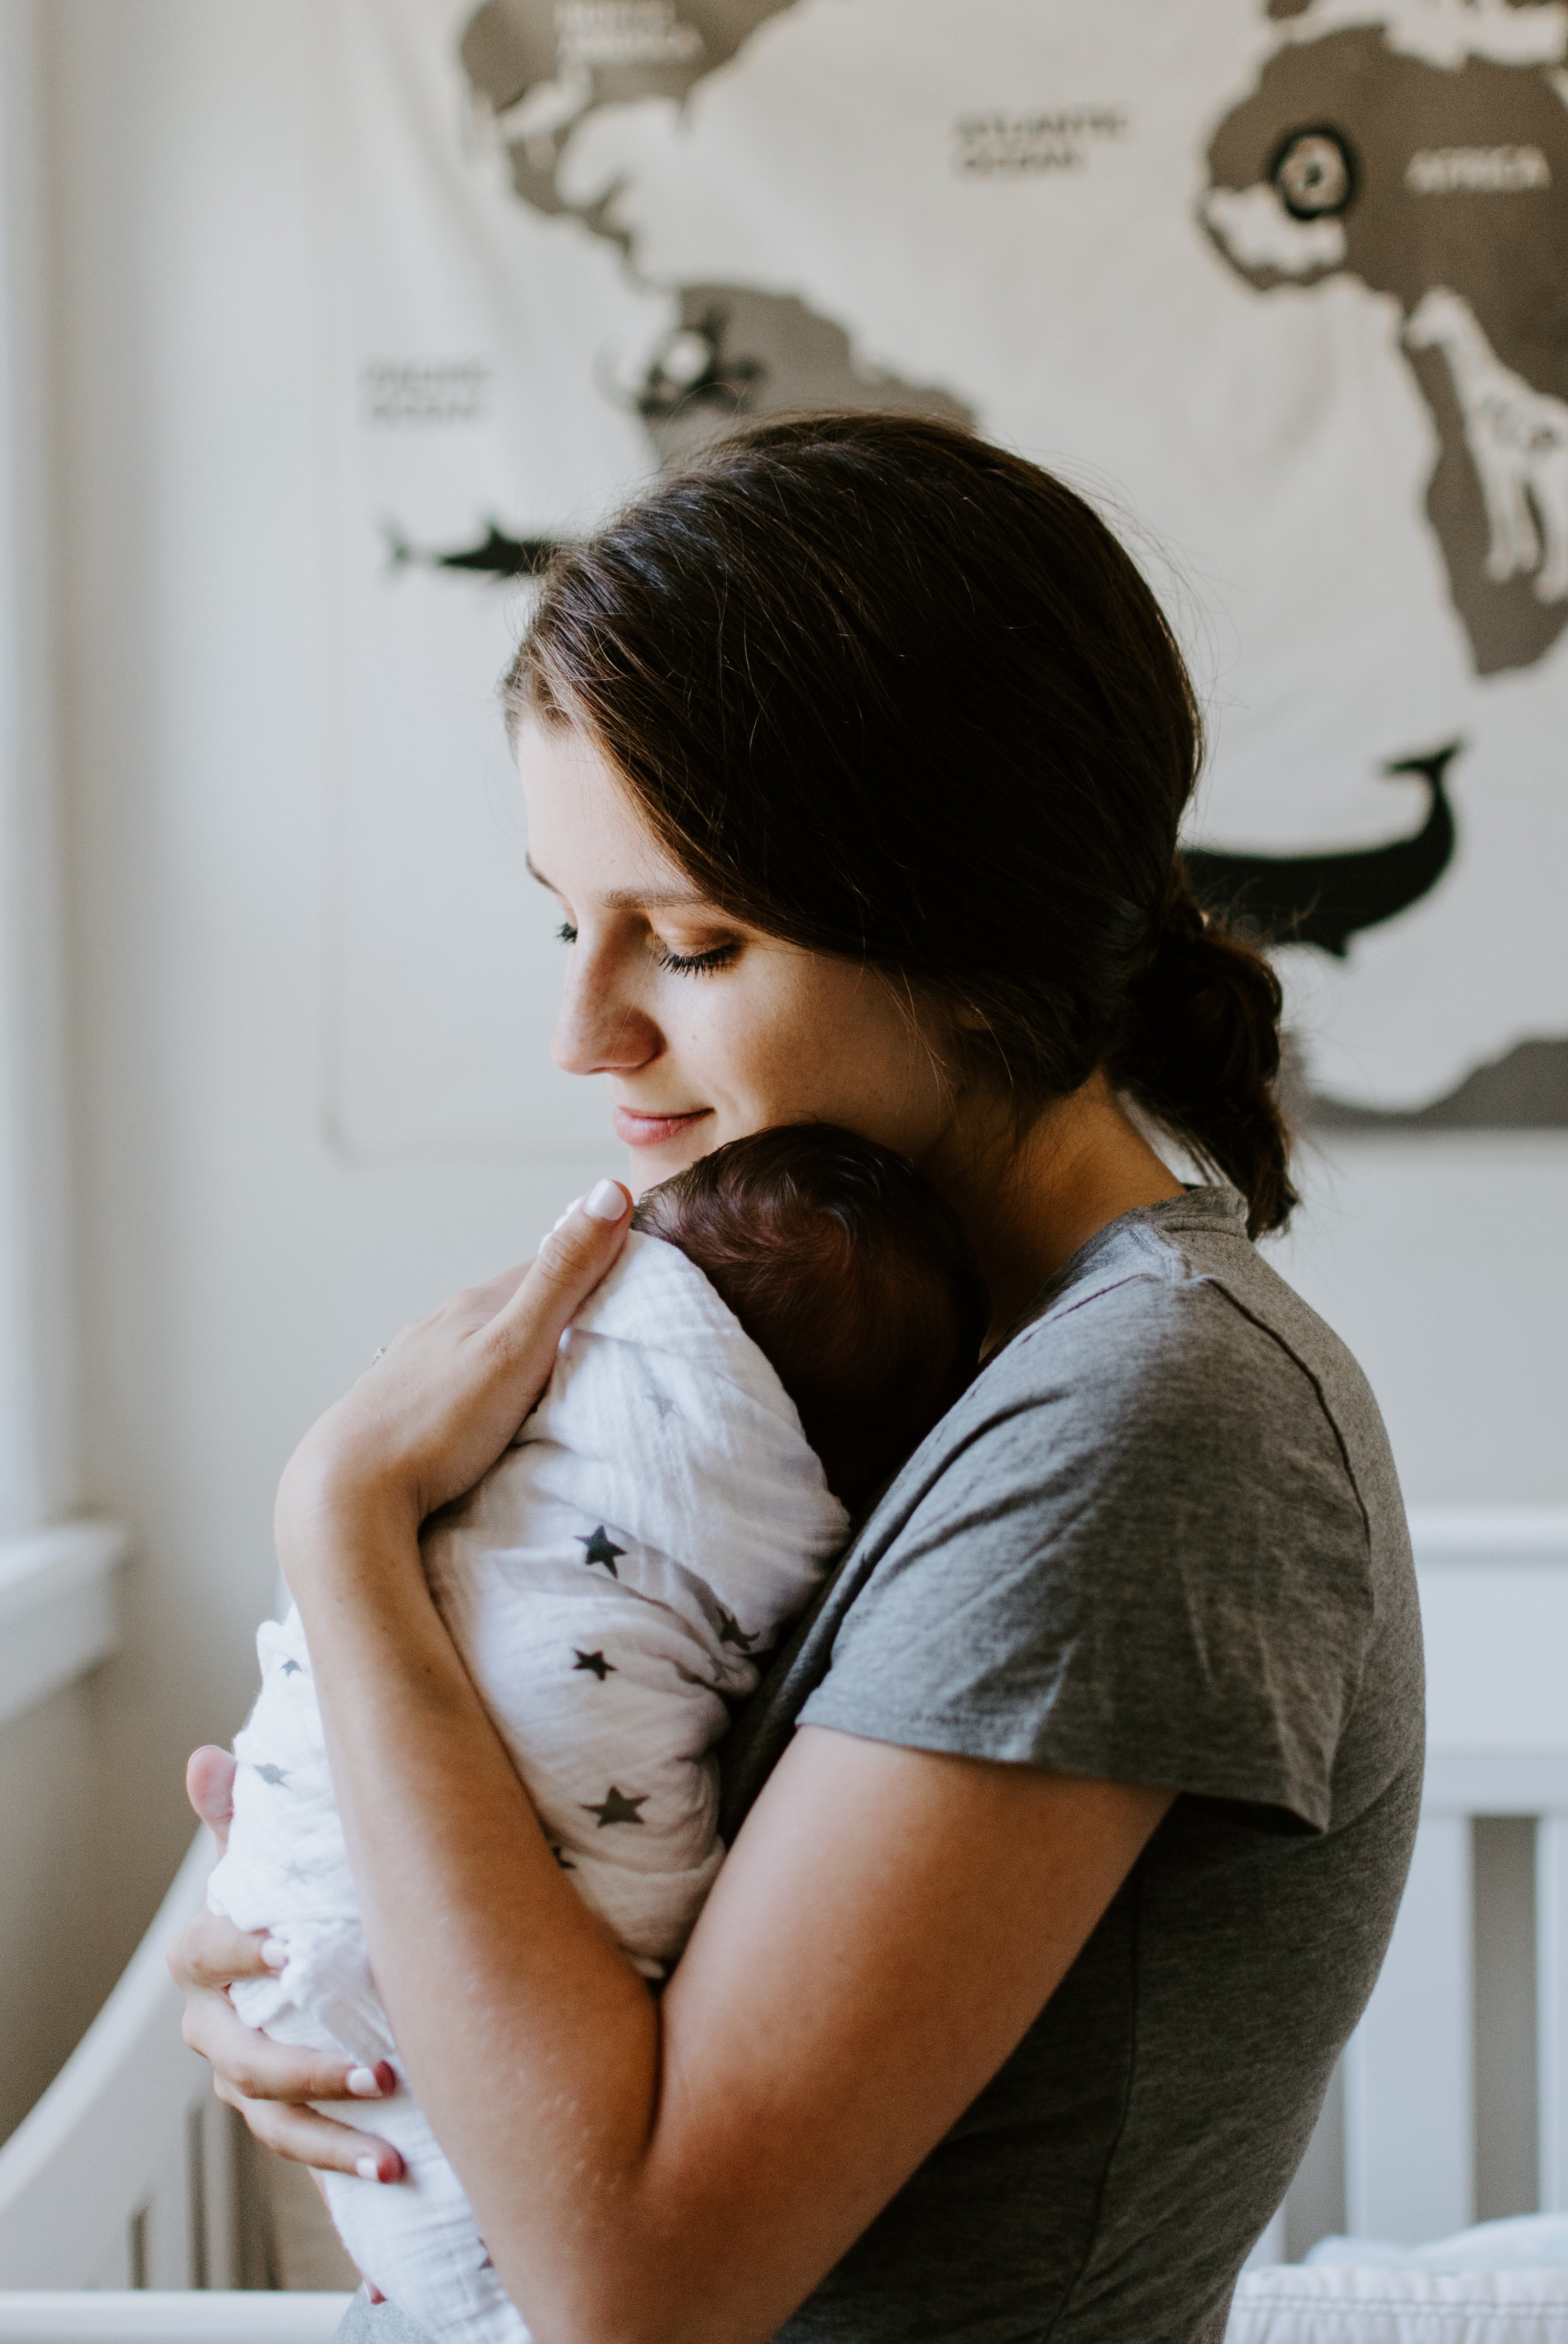 Audrey welcomed a baby boy she named Colin. | Source: Unsplash